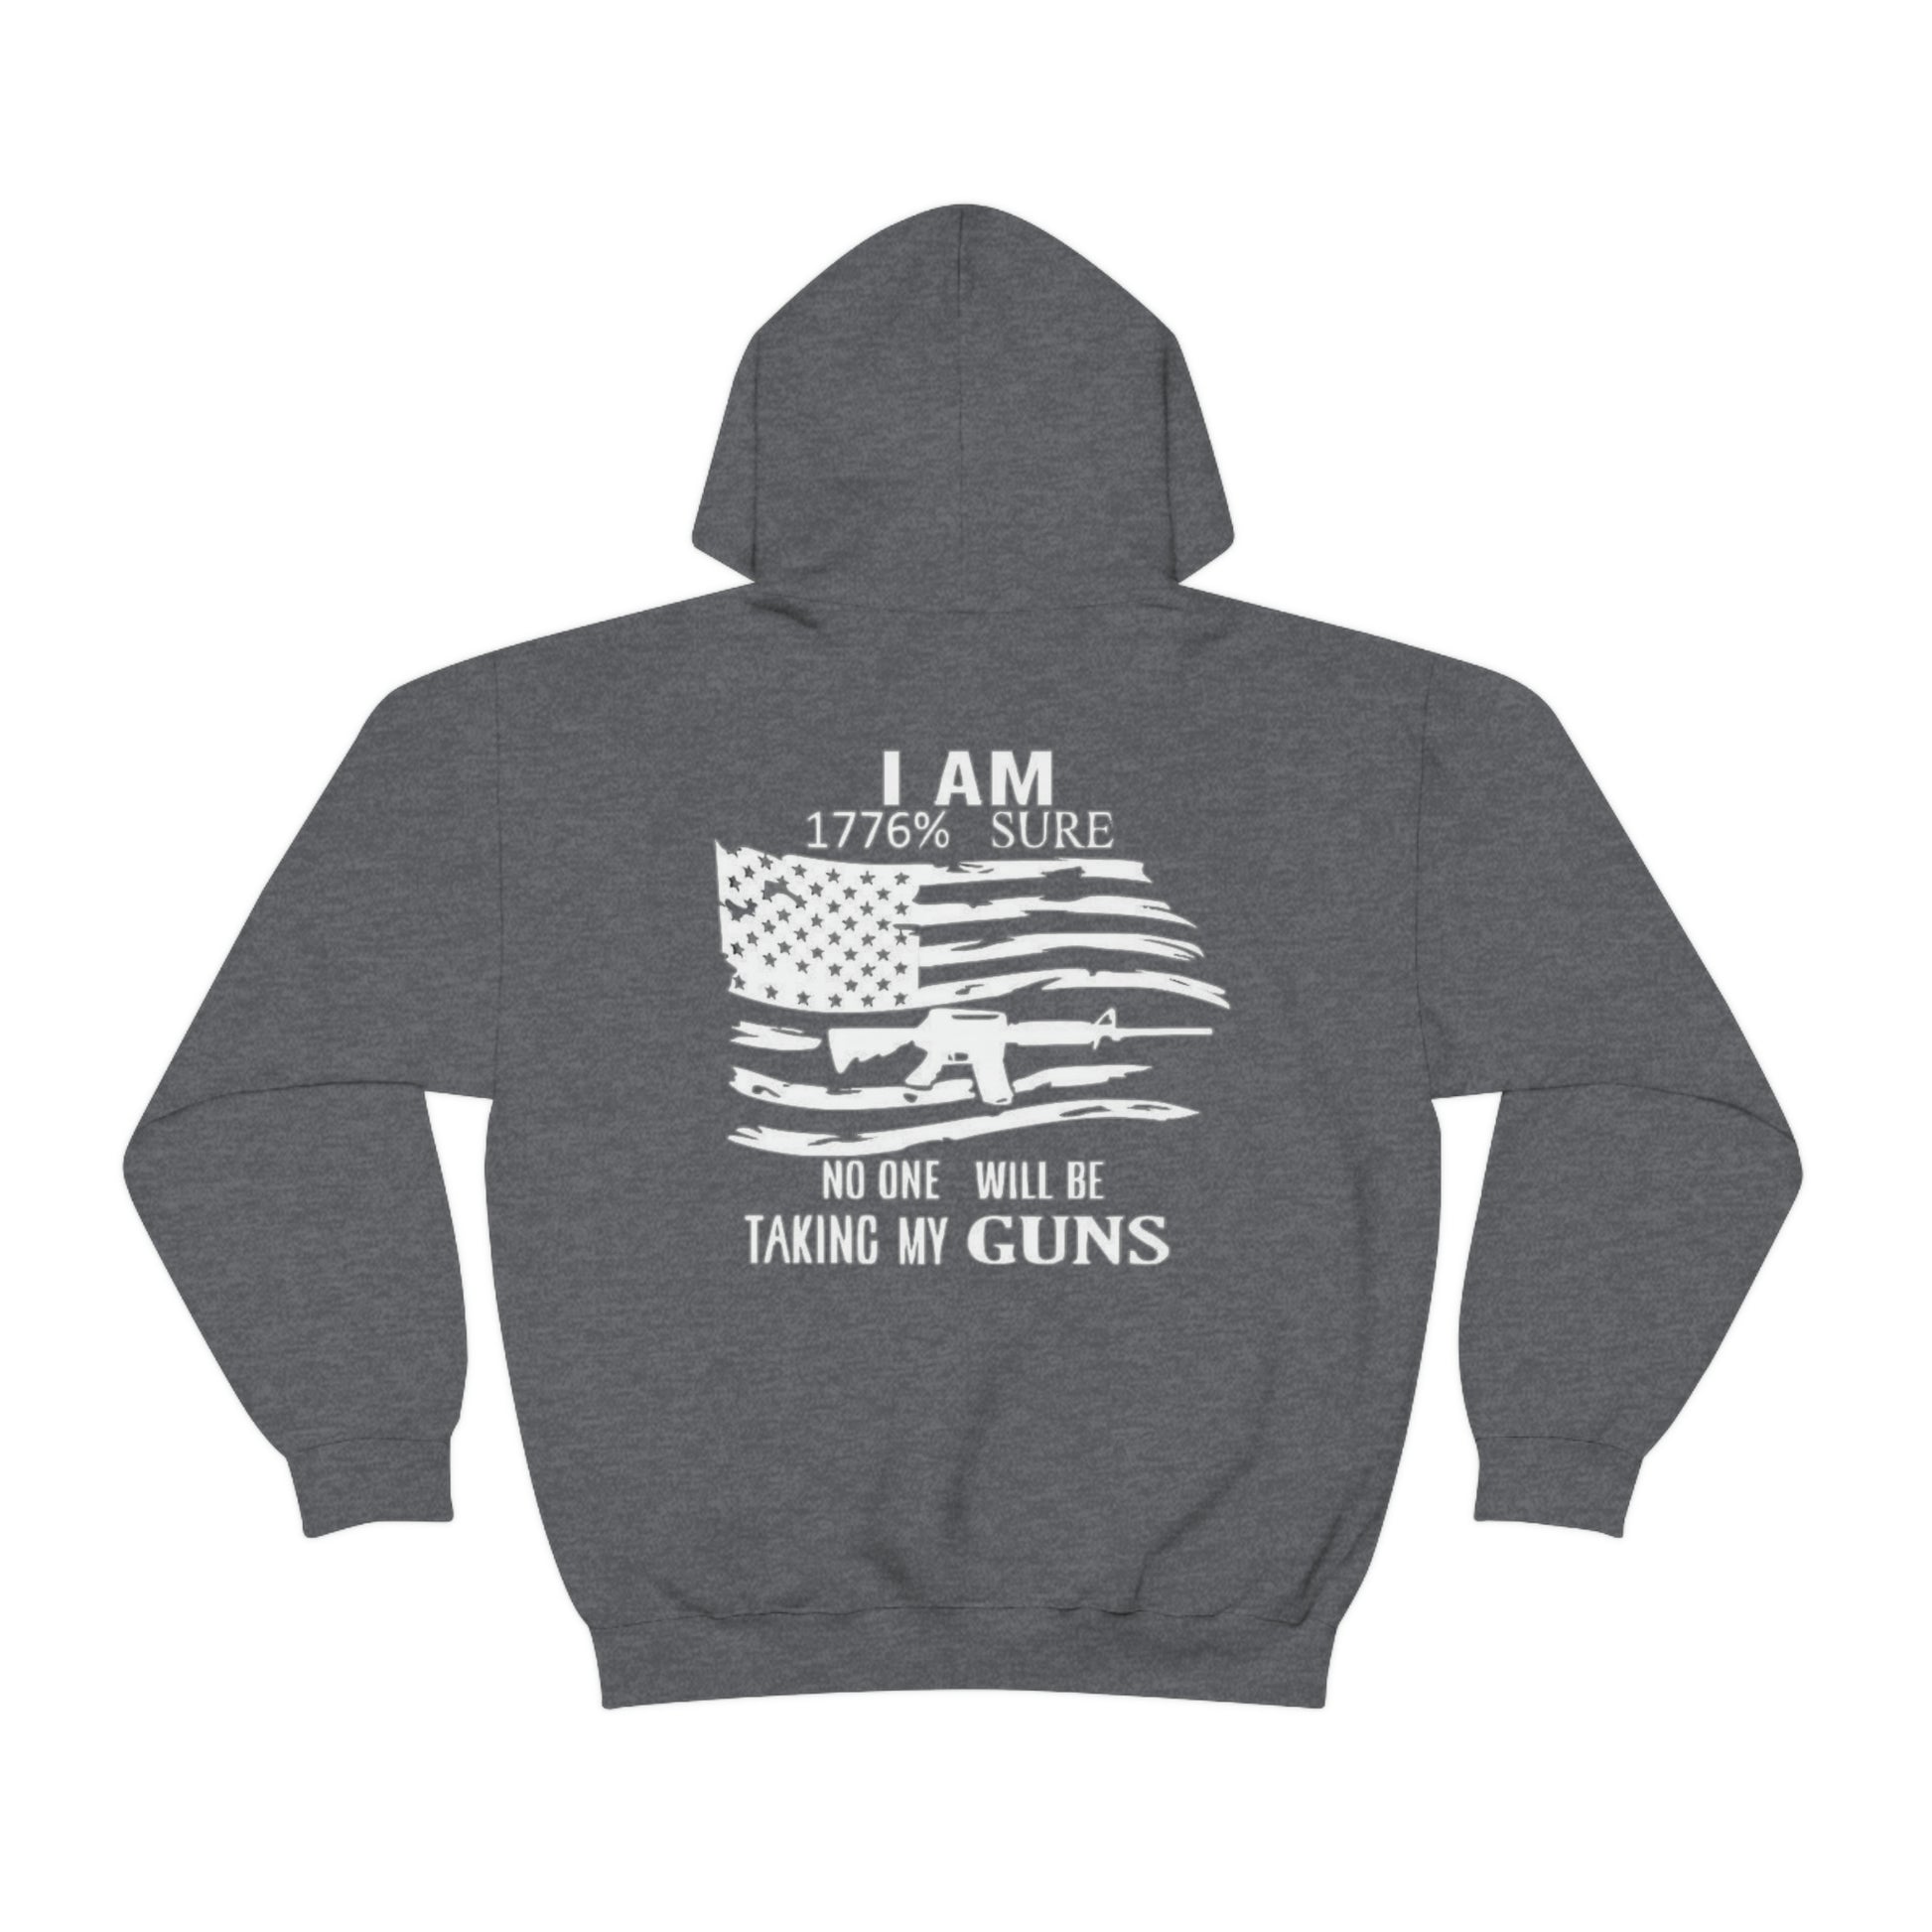 No One Will Be Taking My Guns Hoodie - Backwoods Branding Co.